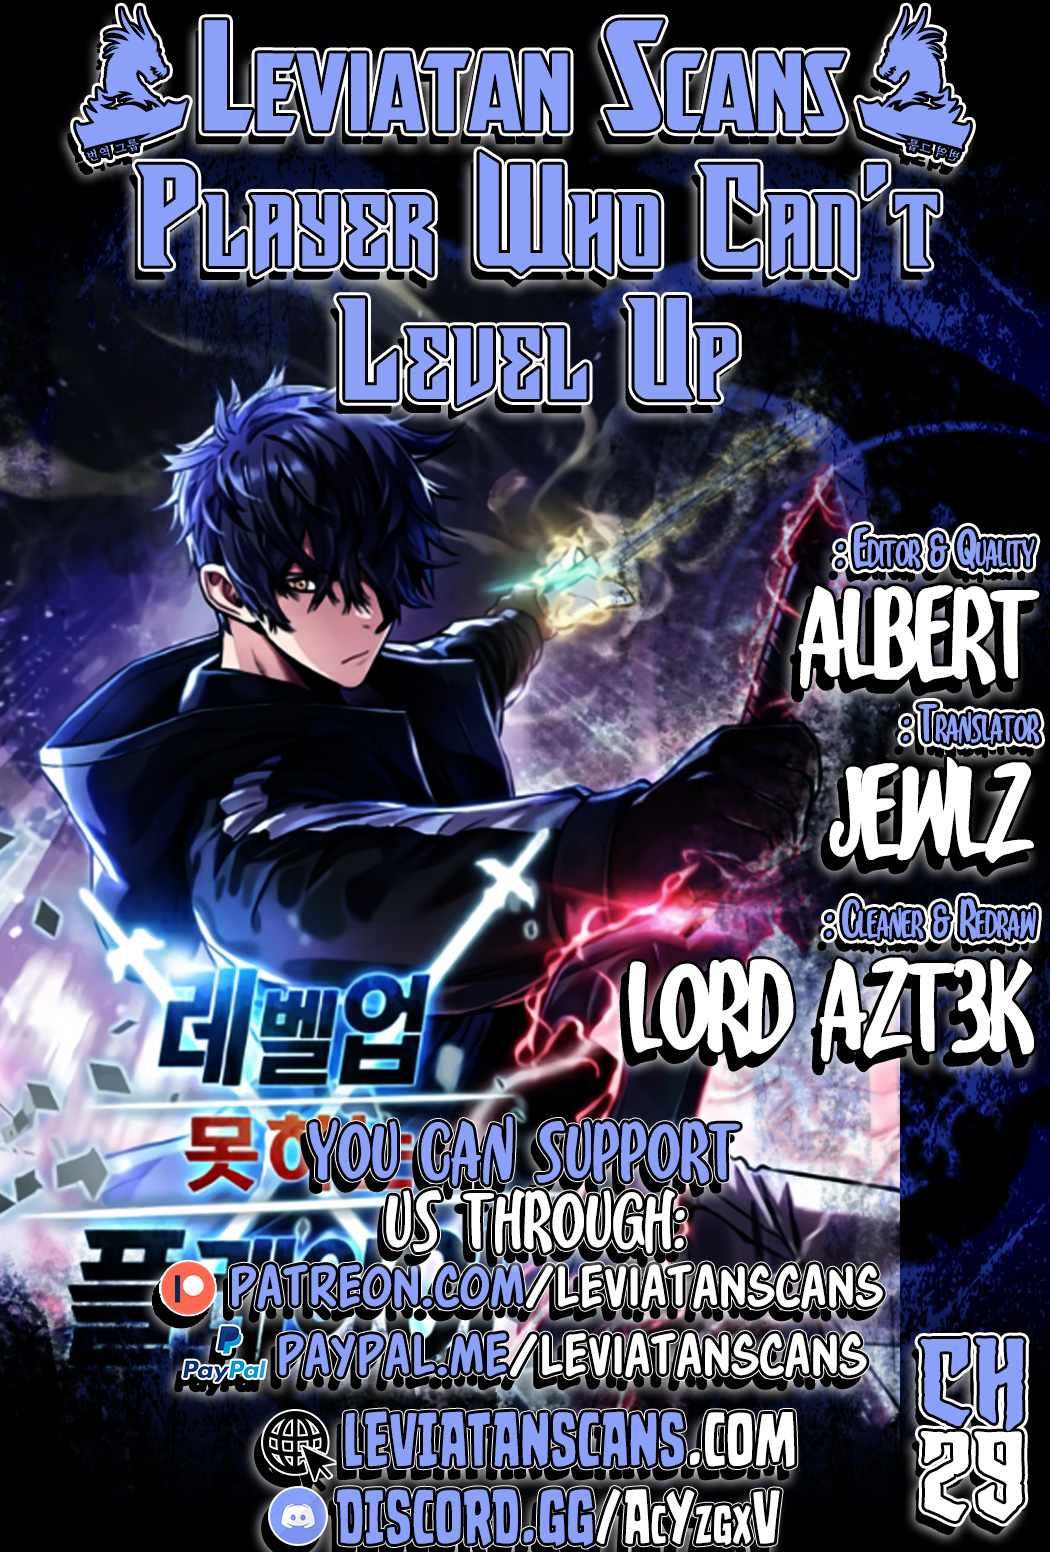 The Player That Can't Level Up - Chapter 3175 - Image 1